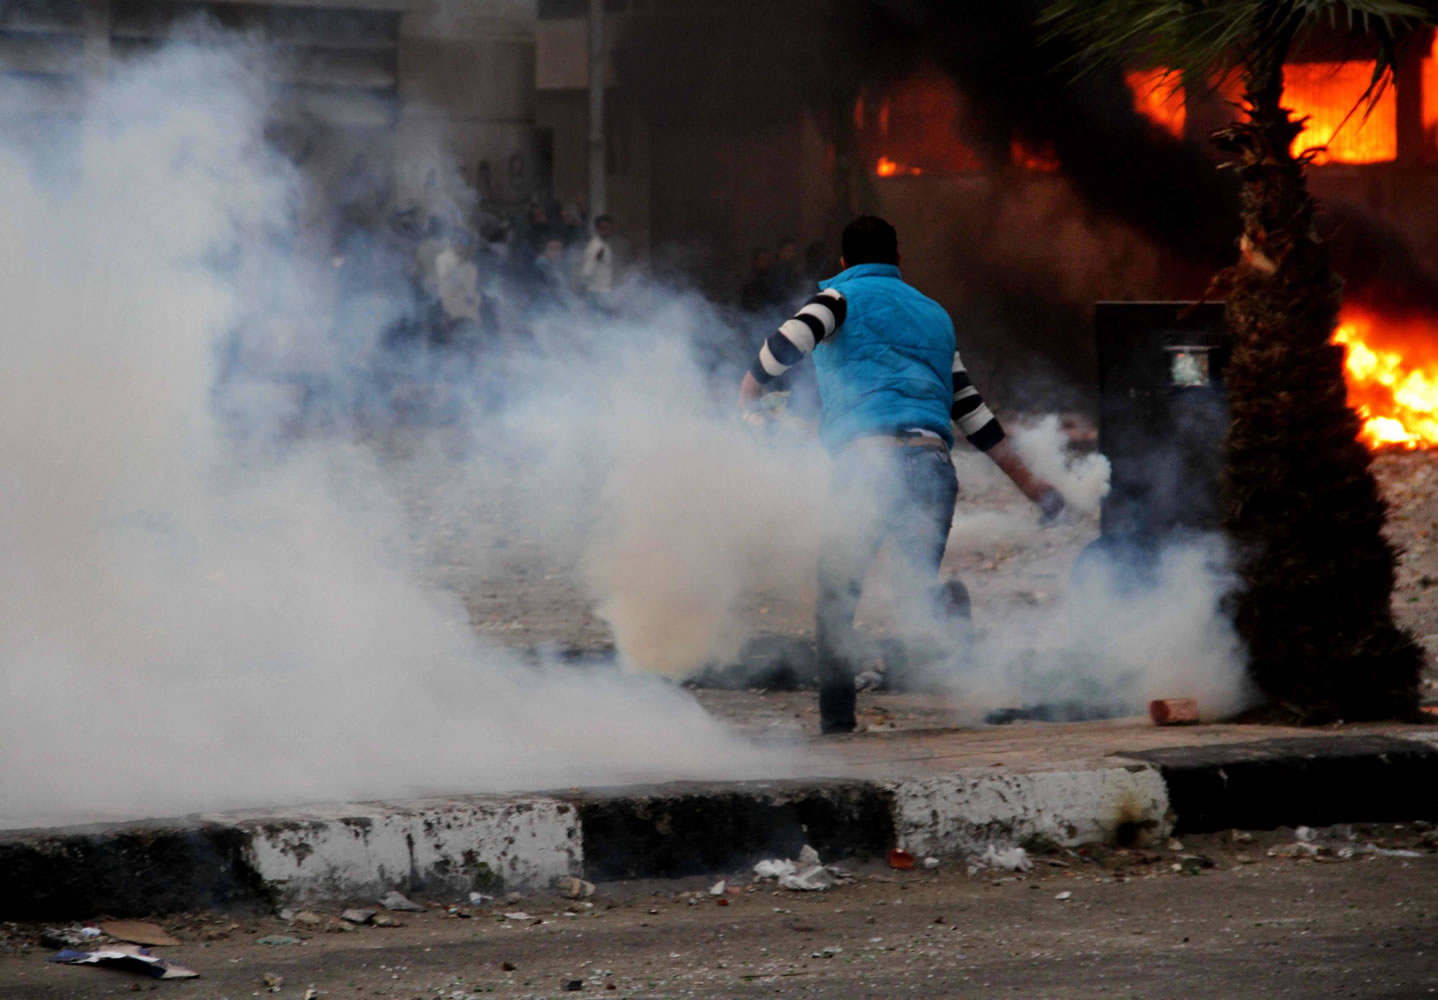 An Egyptian protester throws back a tear gas canister toward police, unseen, during clashes in Port Said, Egypt, on Monday.